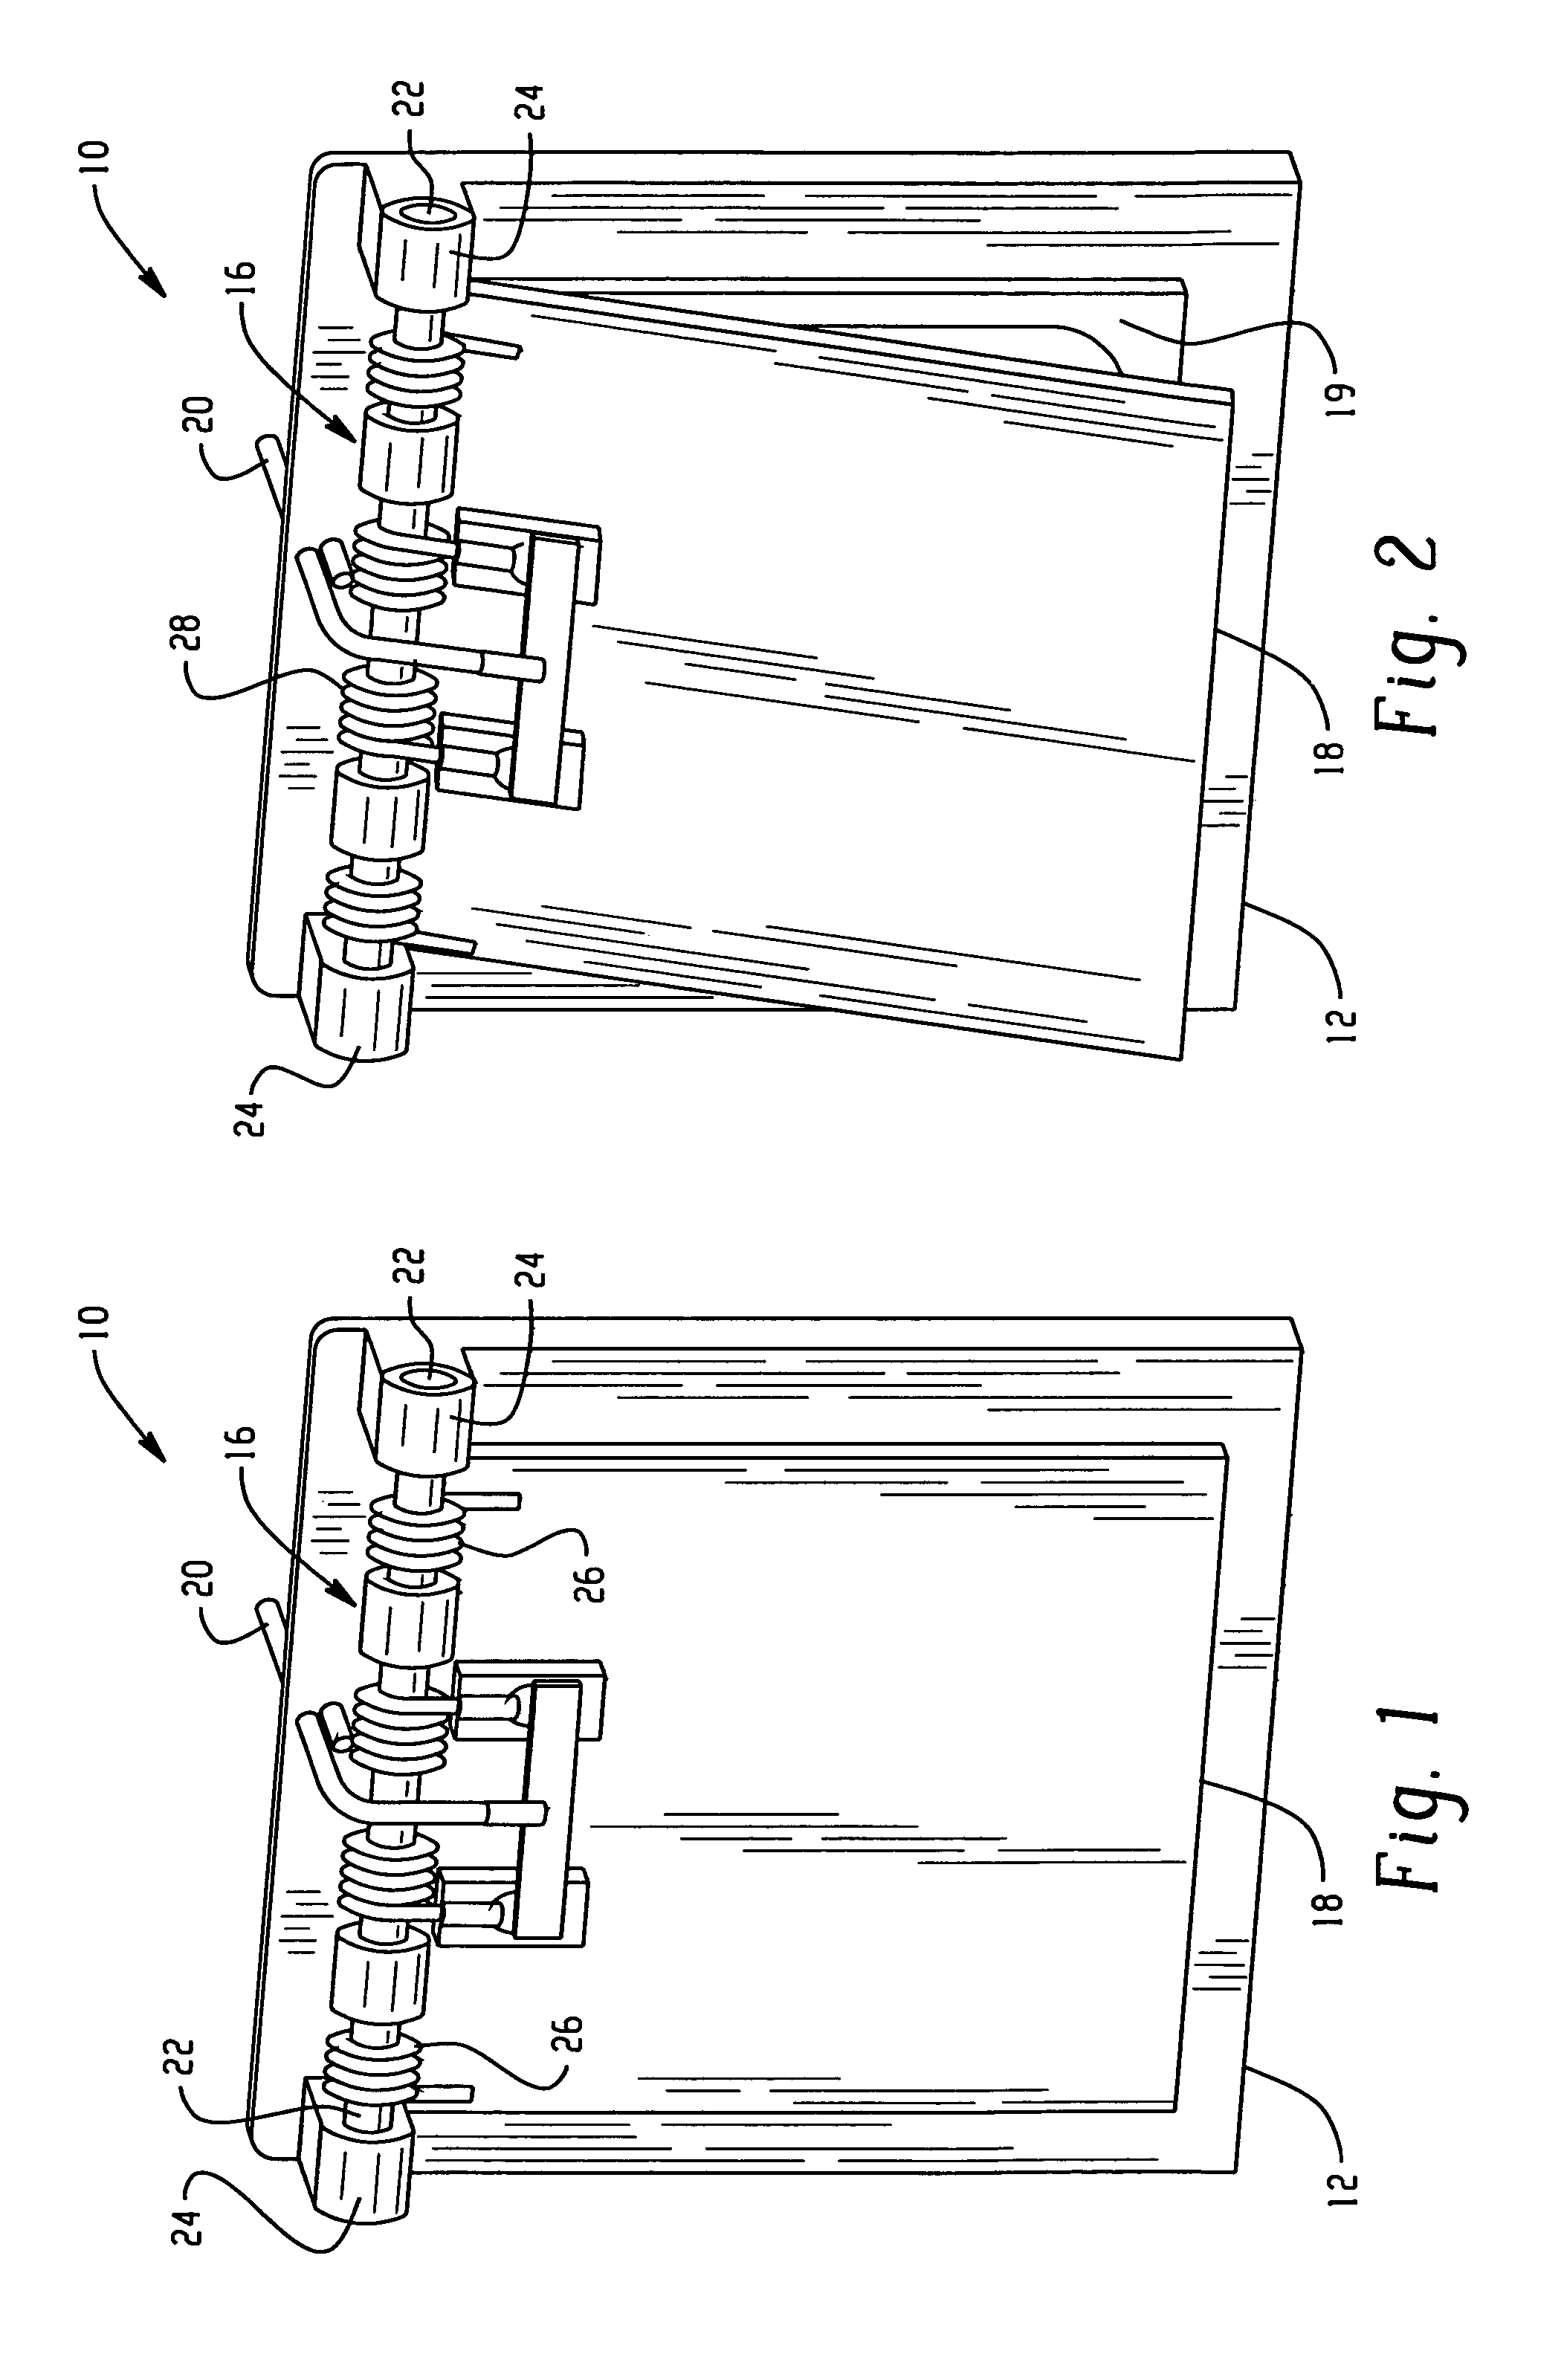 Active pressure relief valves and methods of use